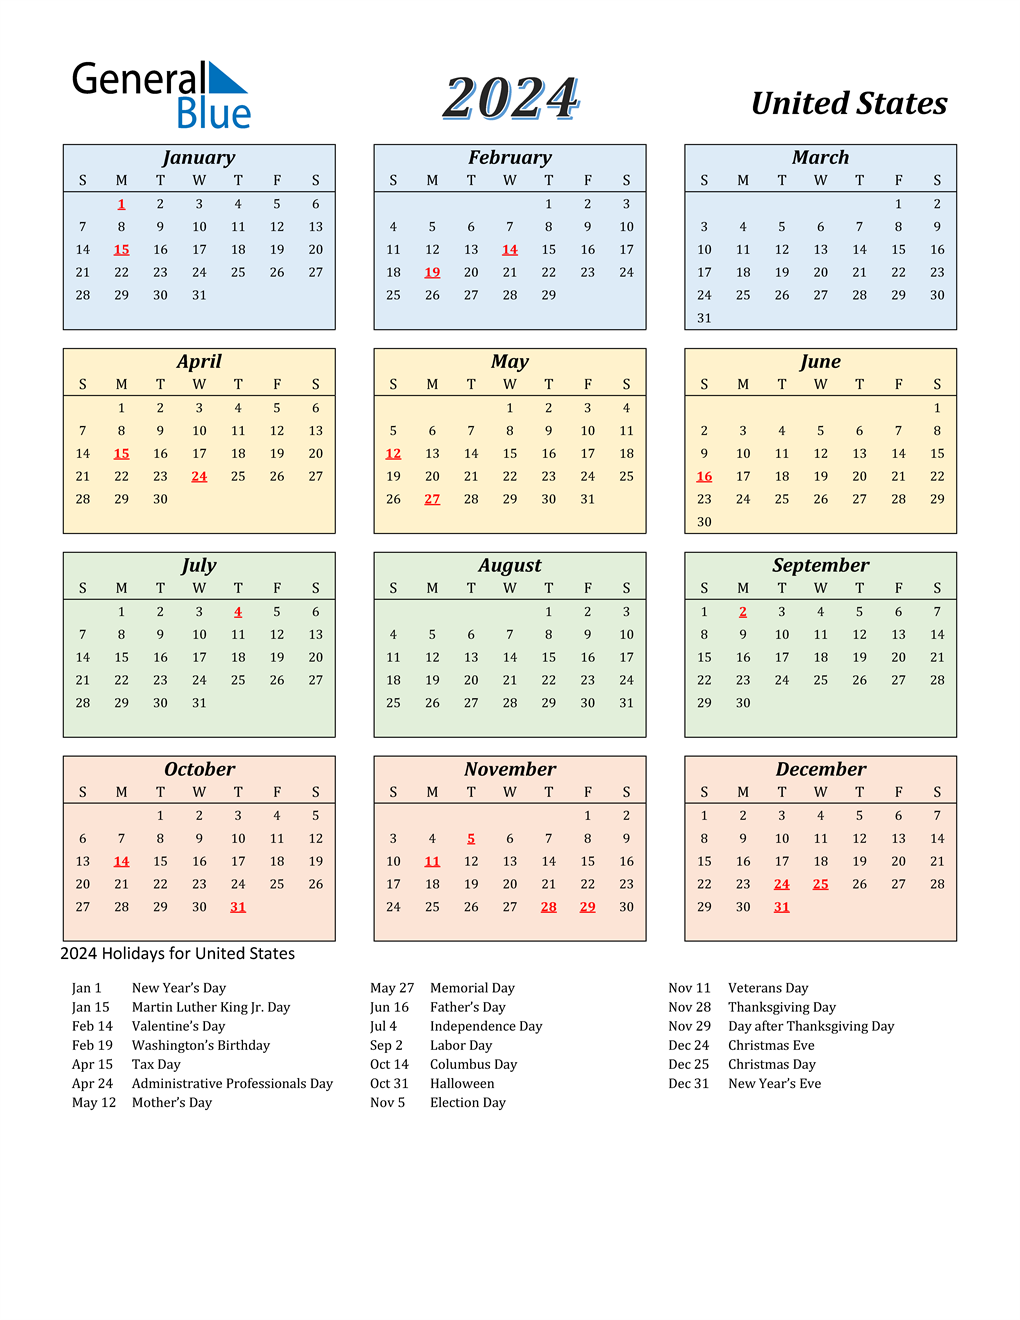 2024-united-states-calendar-with-holidays